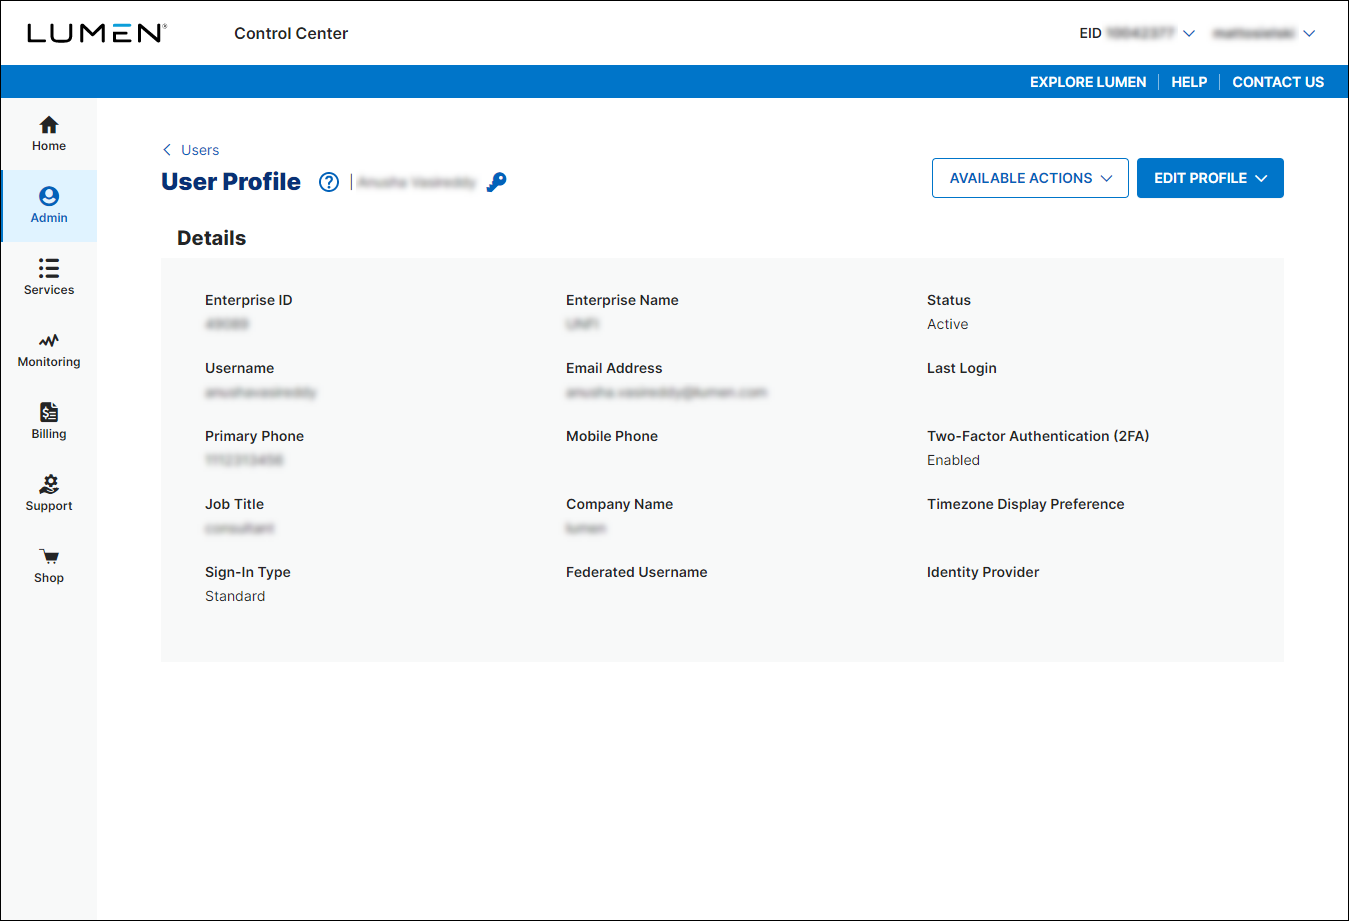 View User Profile (with 2FA added)